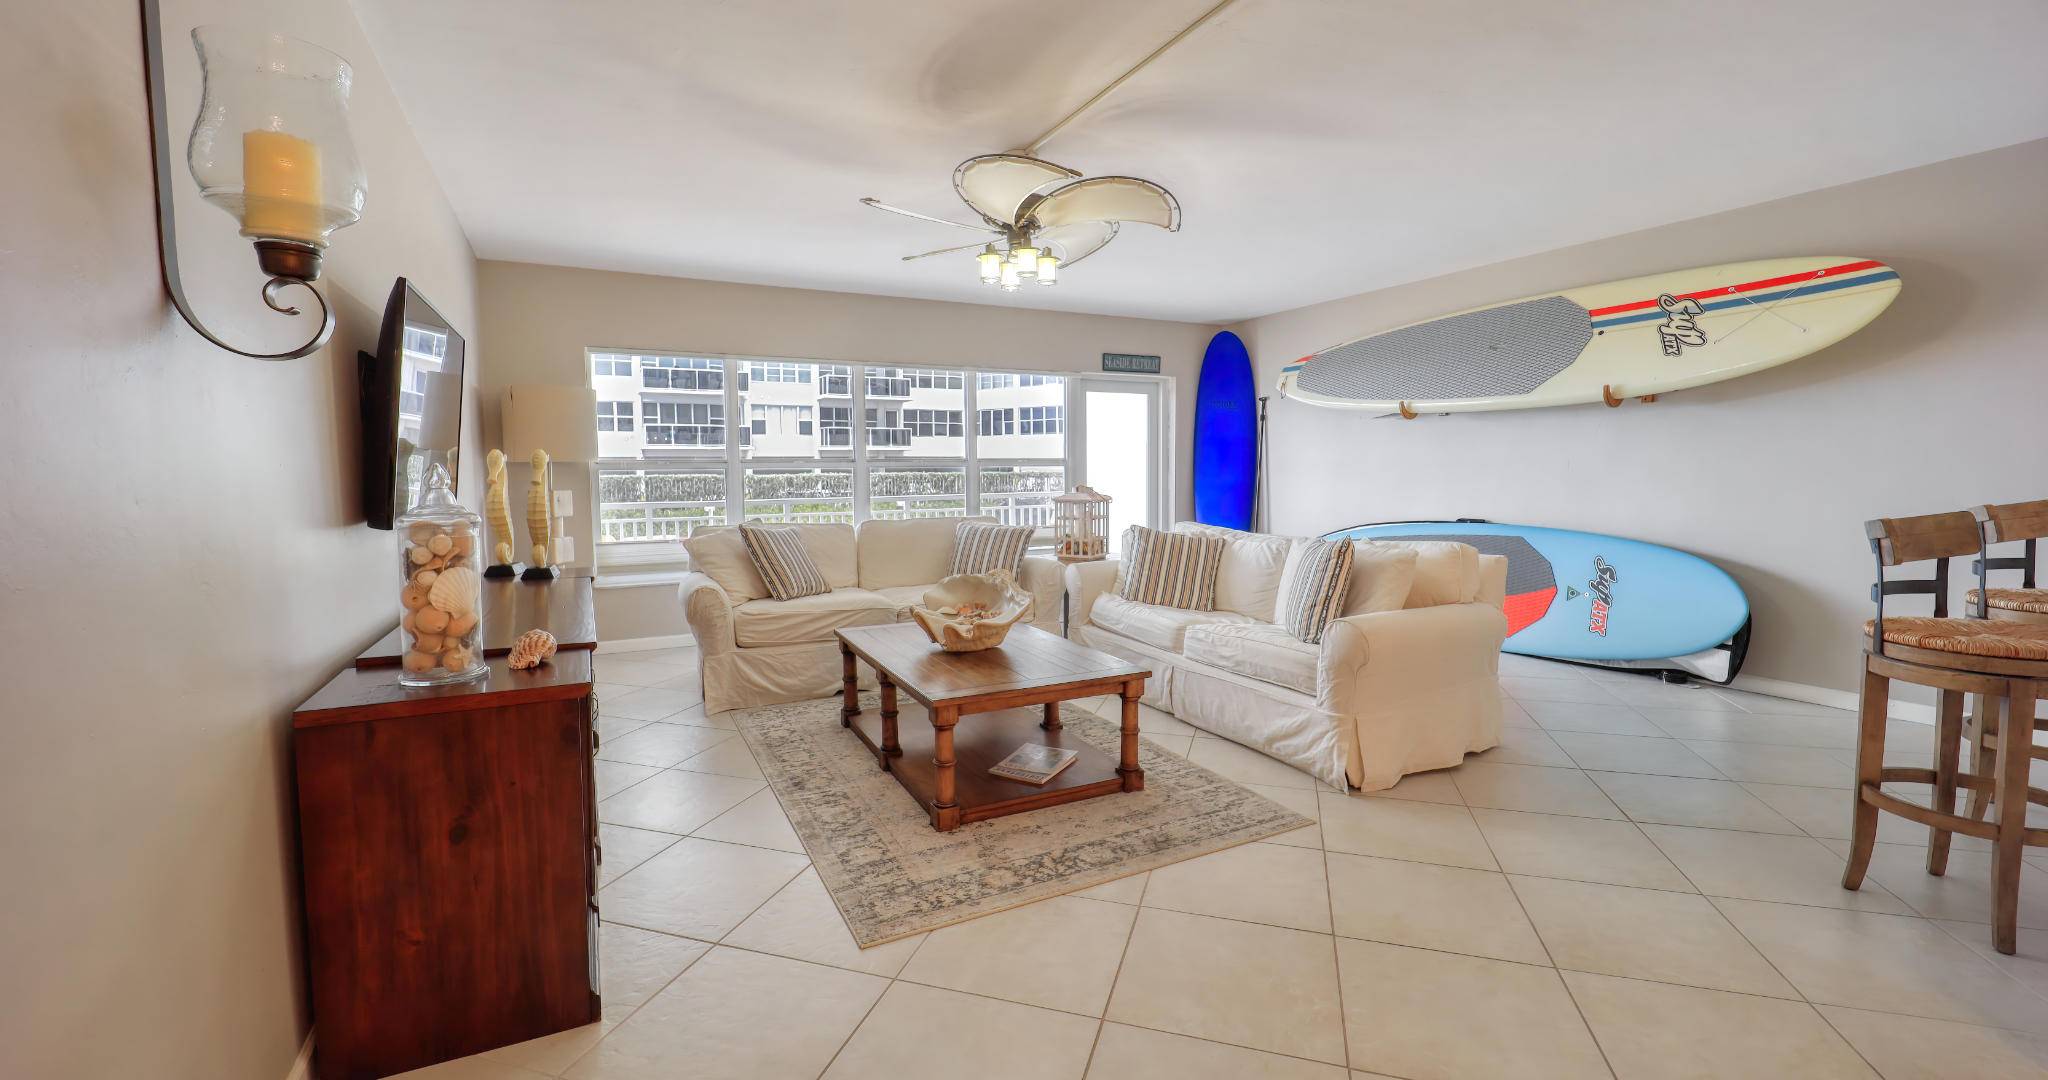 A truly vacation vibe. Breathtaking ocean views in this beautiful, updated furnished 2 bedroom, 2 bathroom seasonal rental unit.